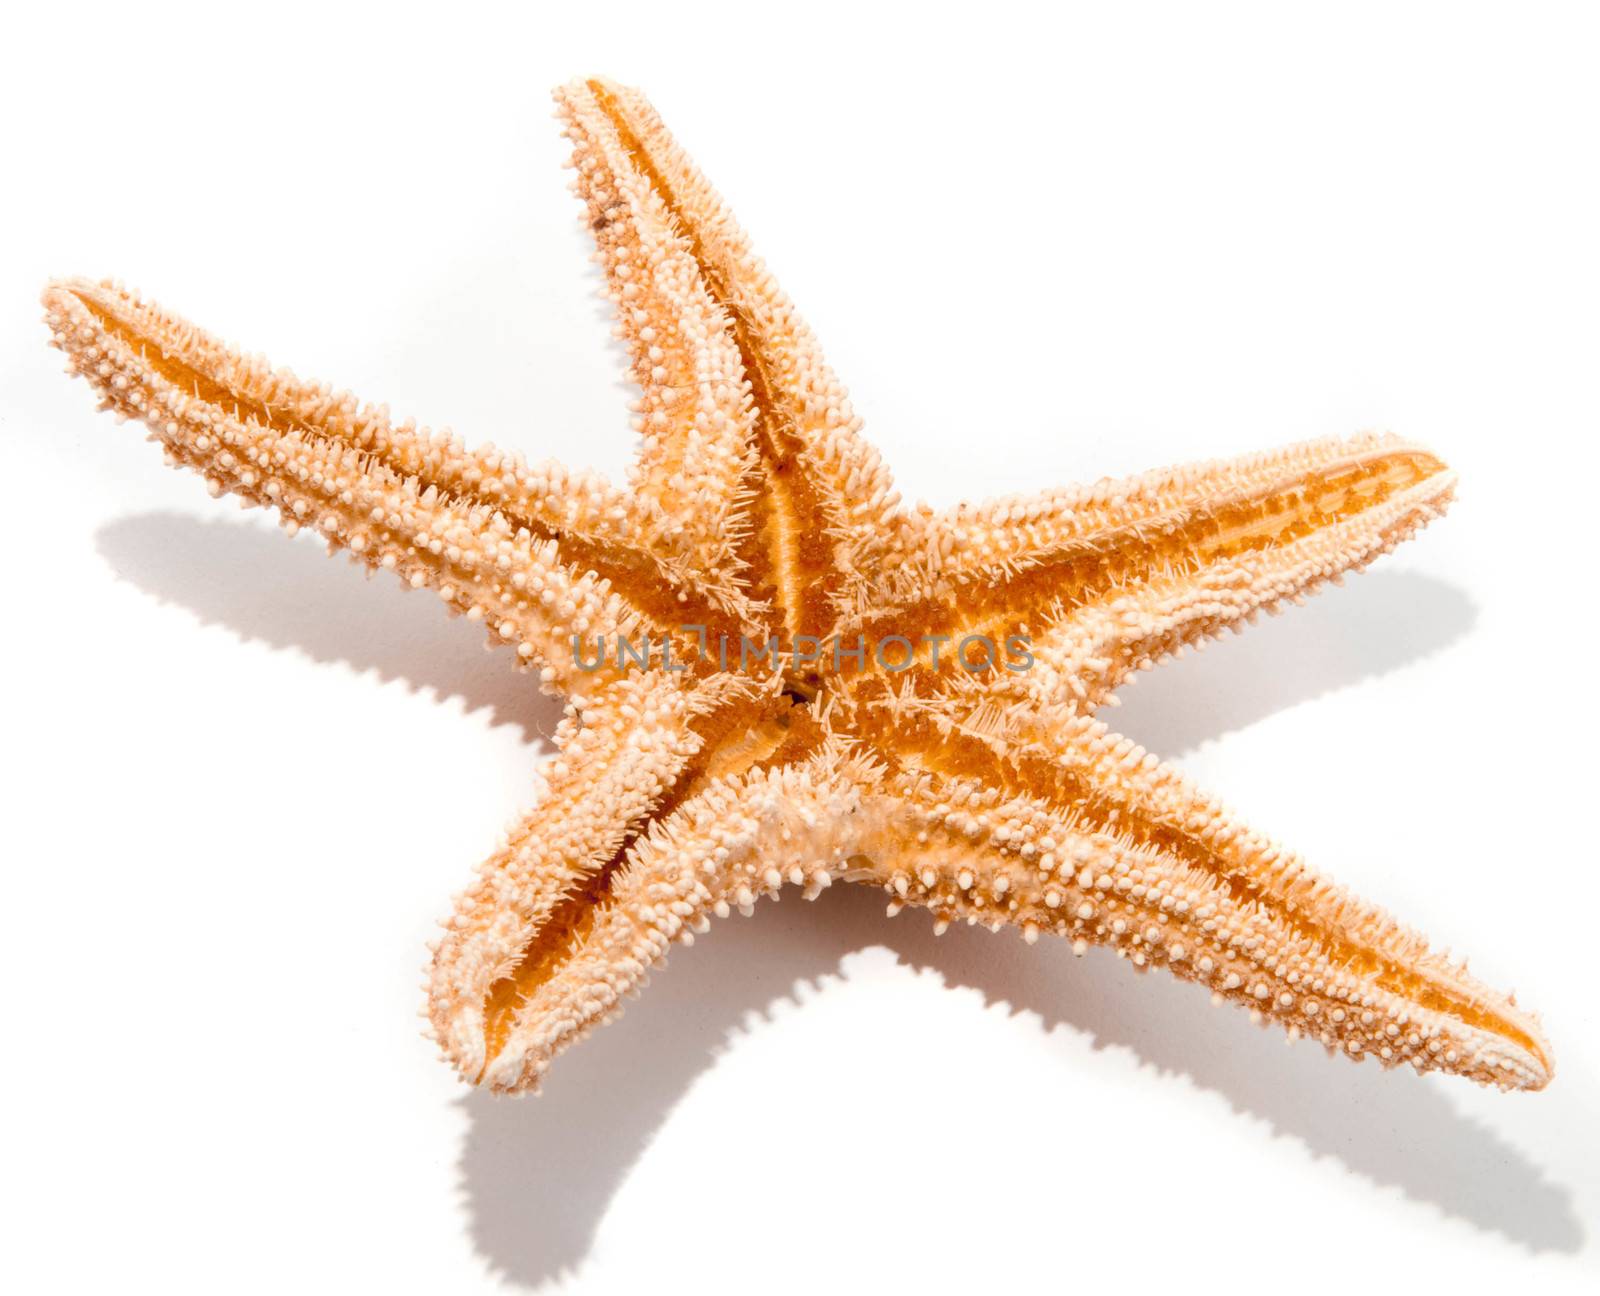 Starfish from oceans